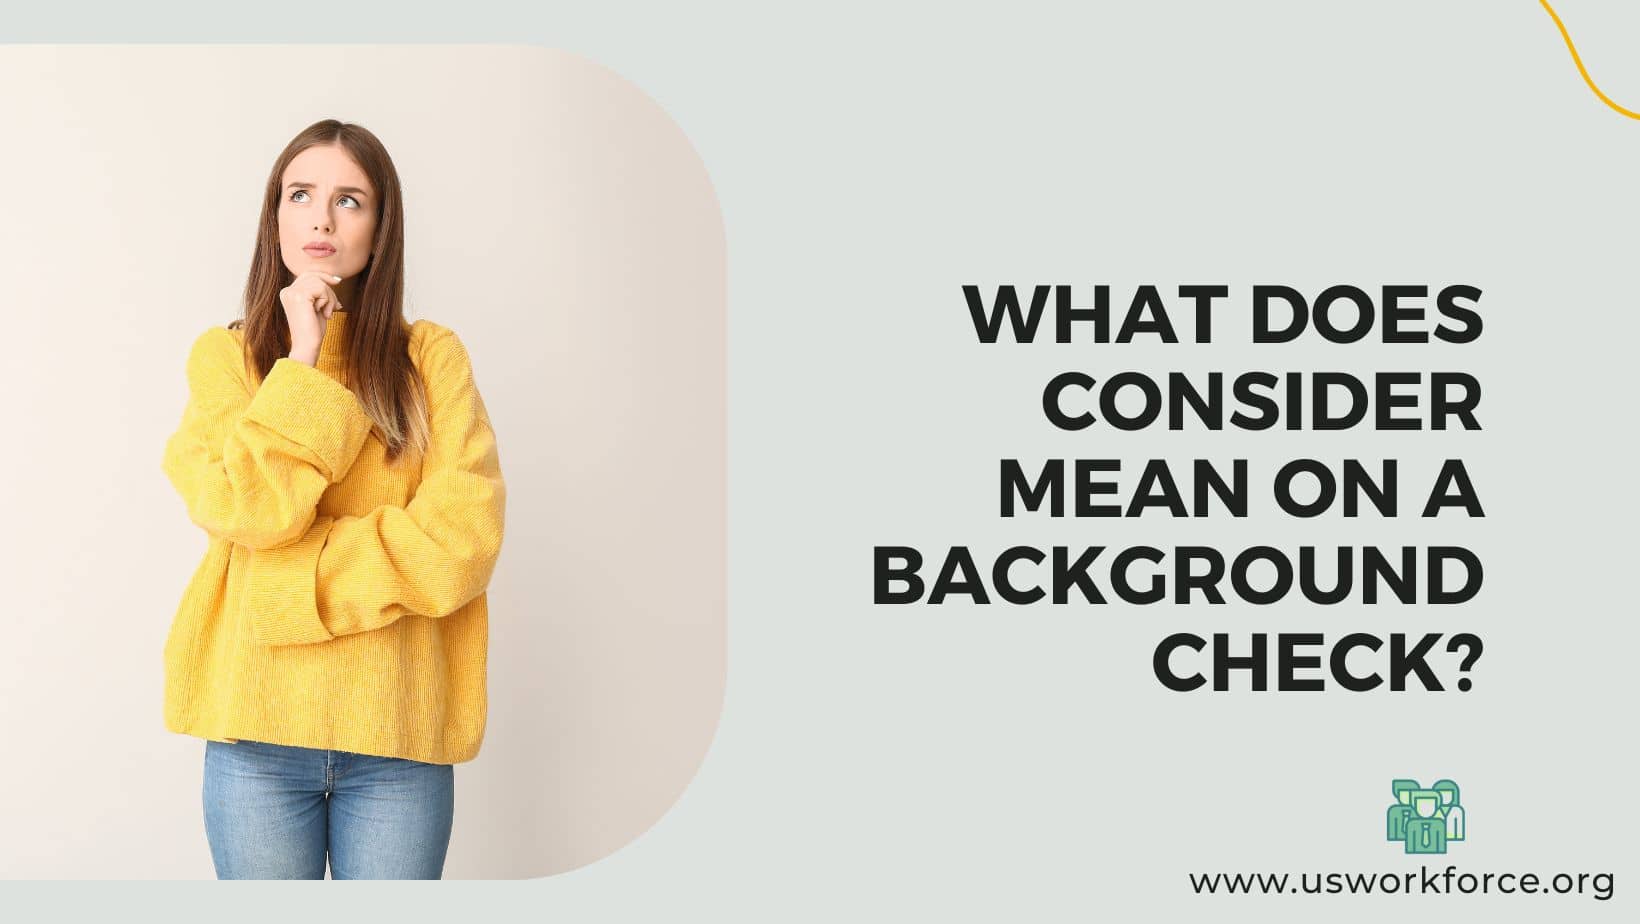 What Does Consider Mean On A Background Check?